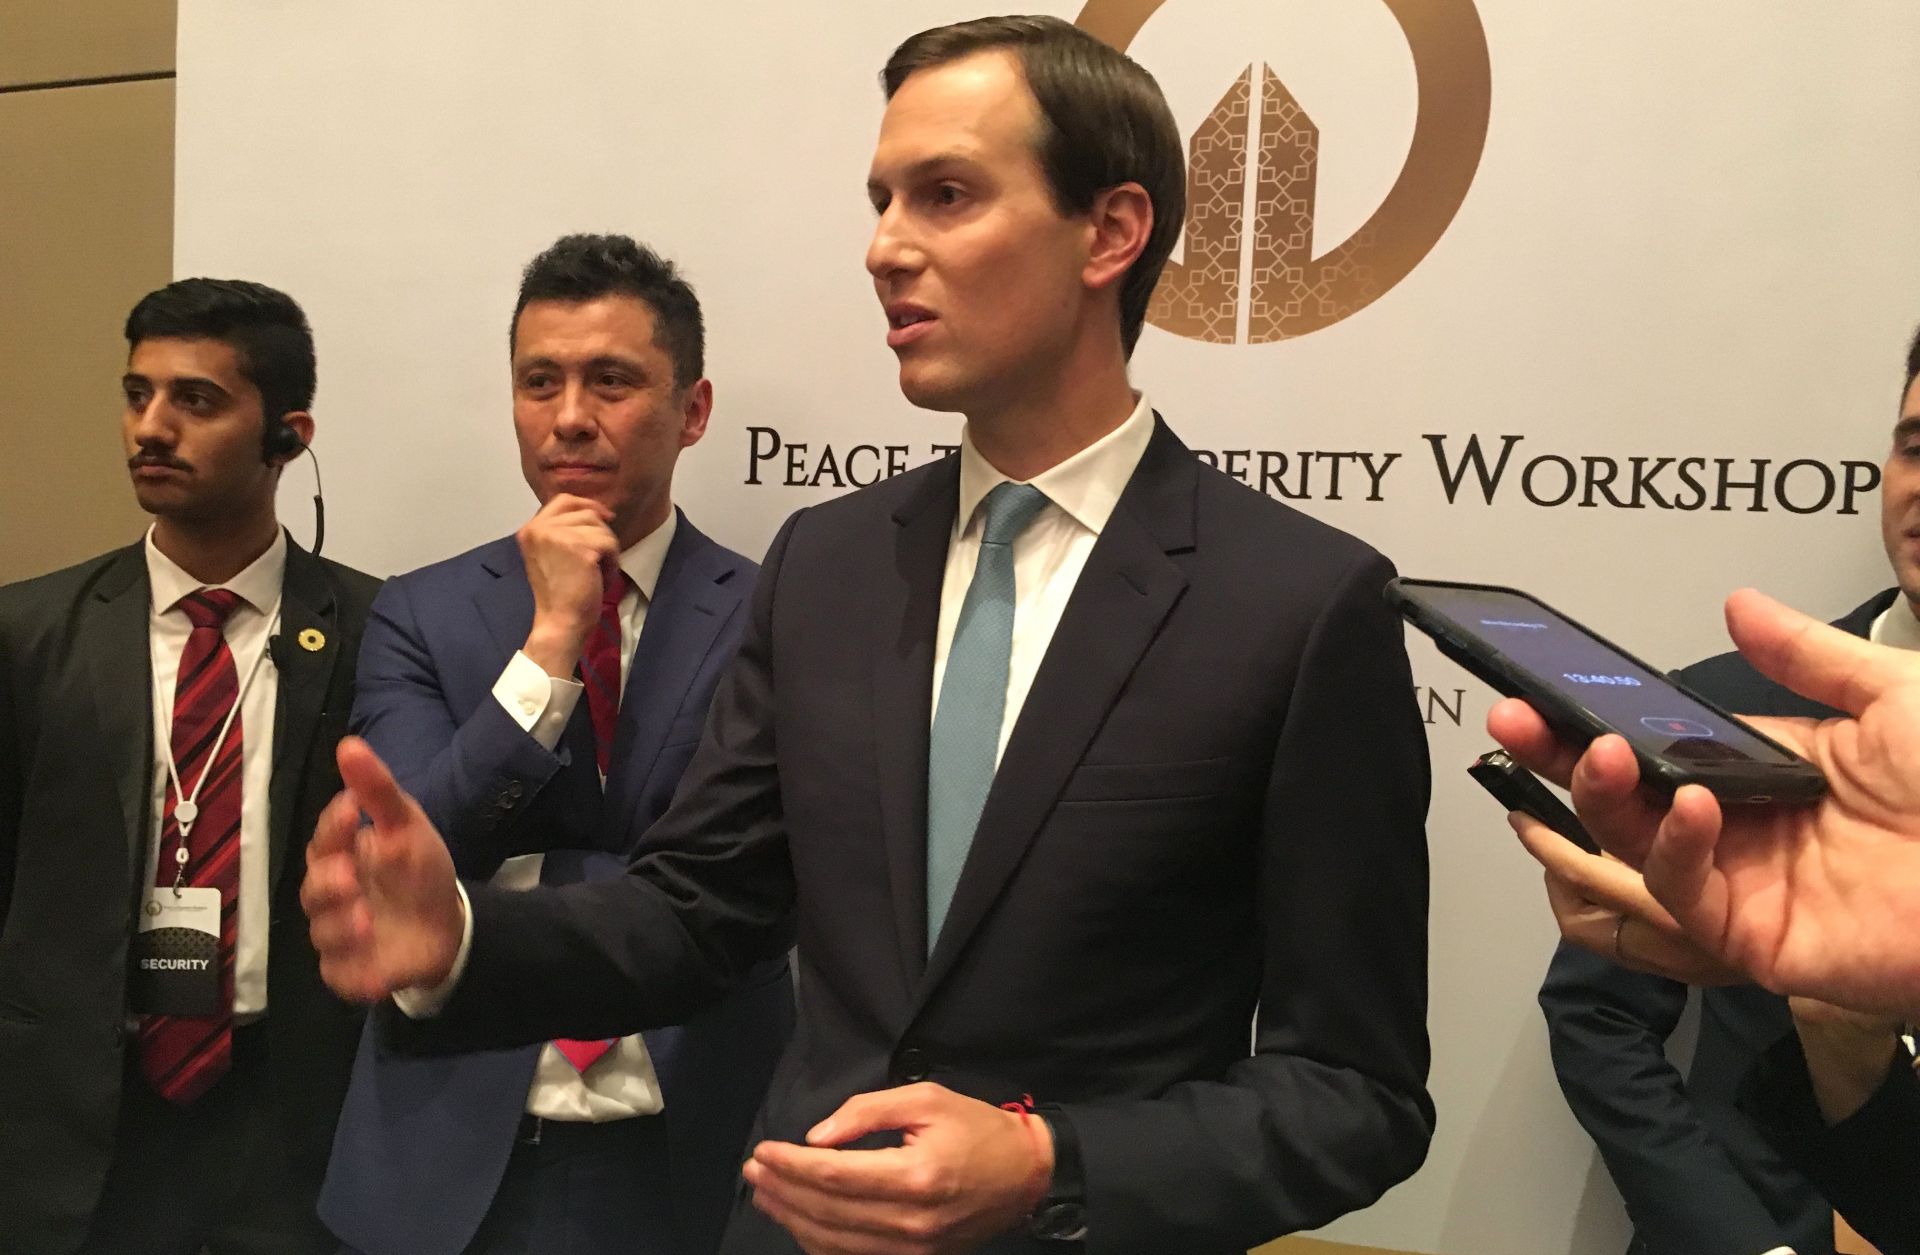 Jared Kushner, President Donald Trump's son-in-law and adviser, discusses the U.S.-sponsored Middle East "Peace to Prosperity Workshop" with reporters in the Bahraini capital of Manama on June 26, 2019.